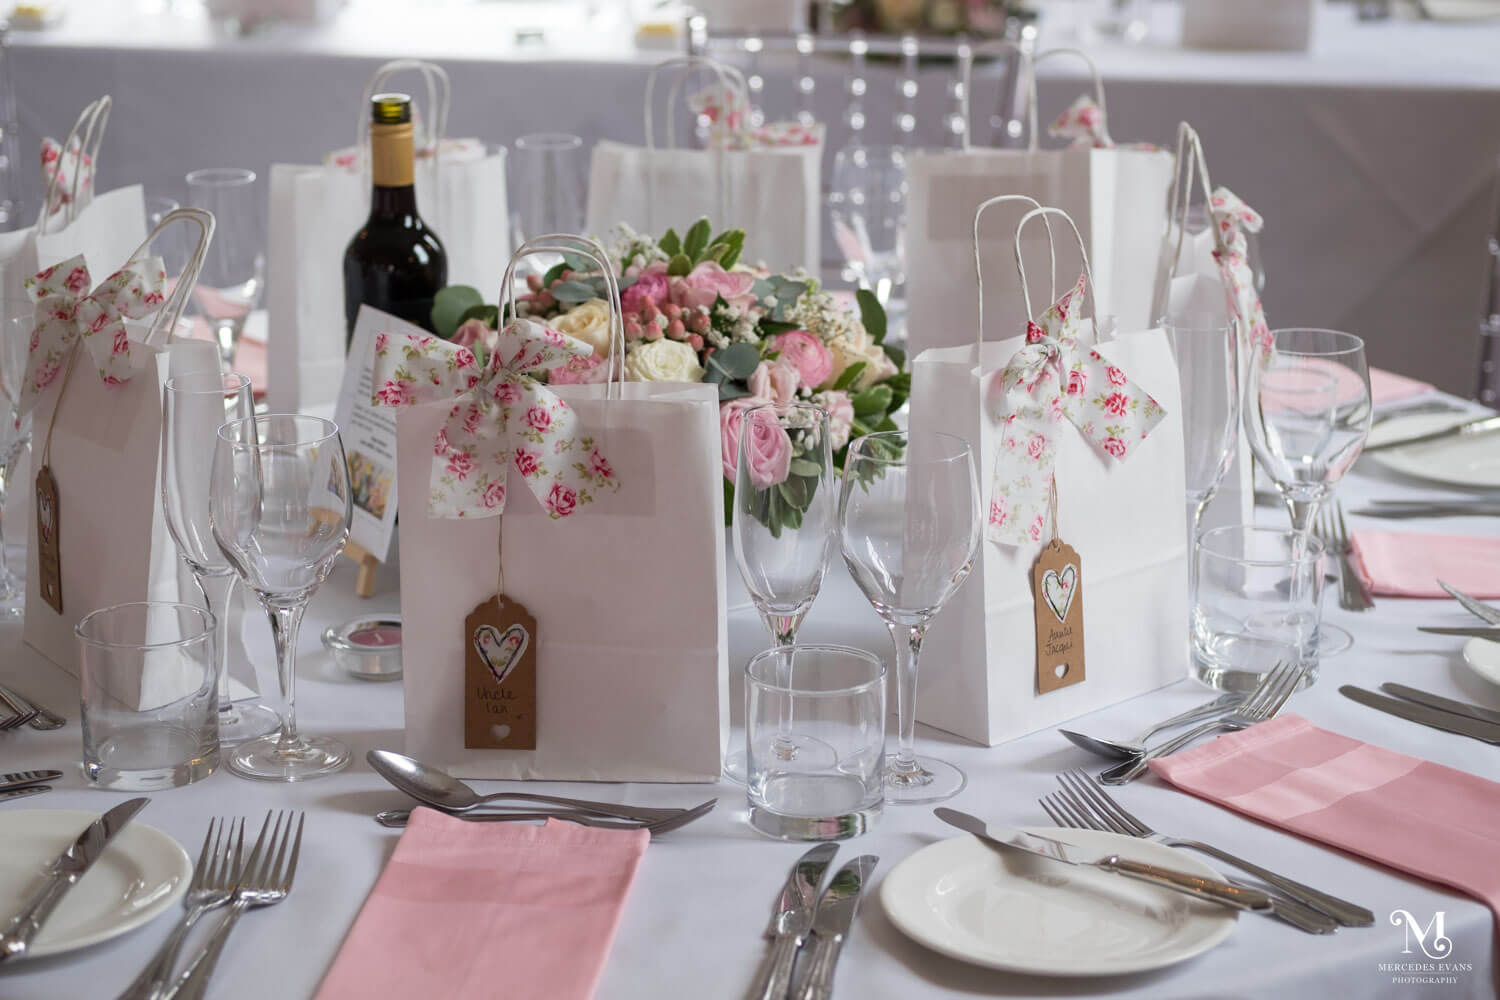 a close up of a wedding breakfast table set up with a pink and white theme